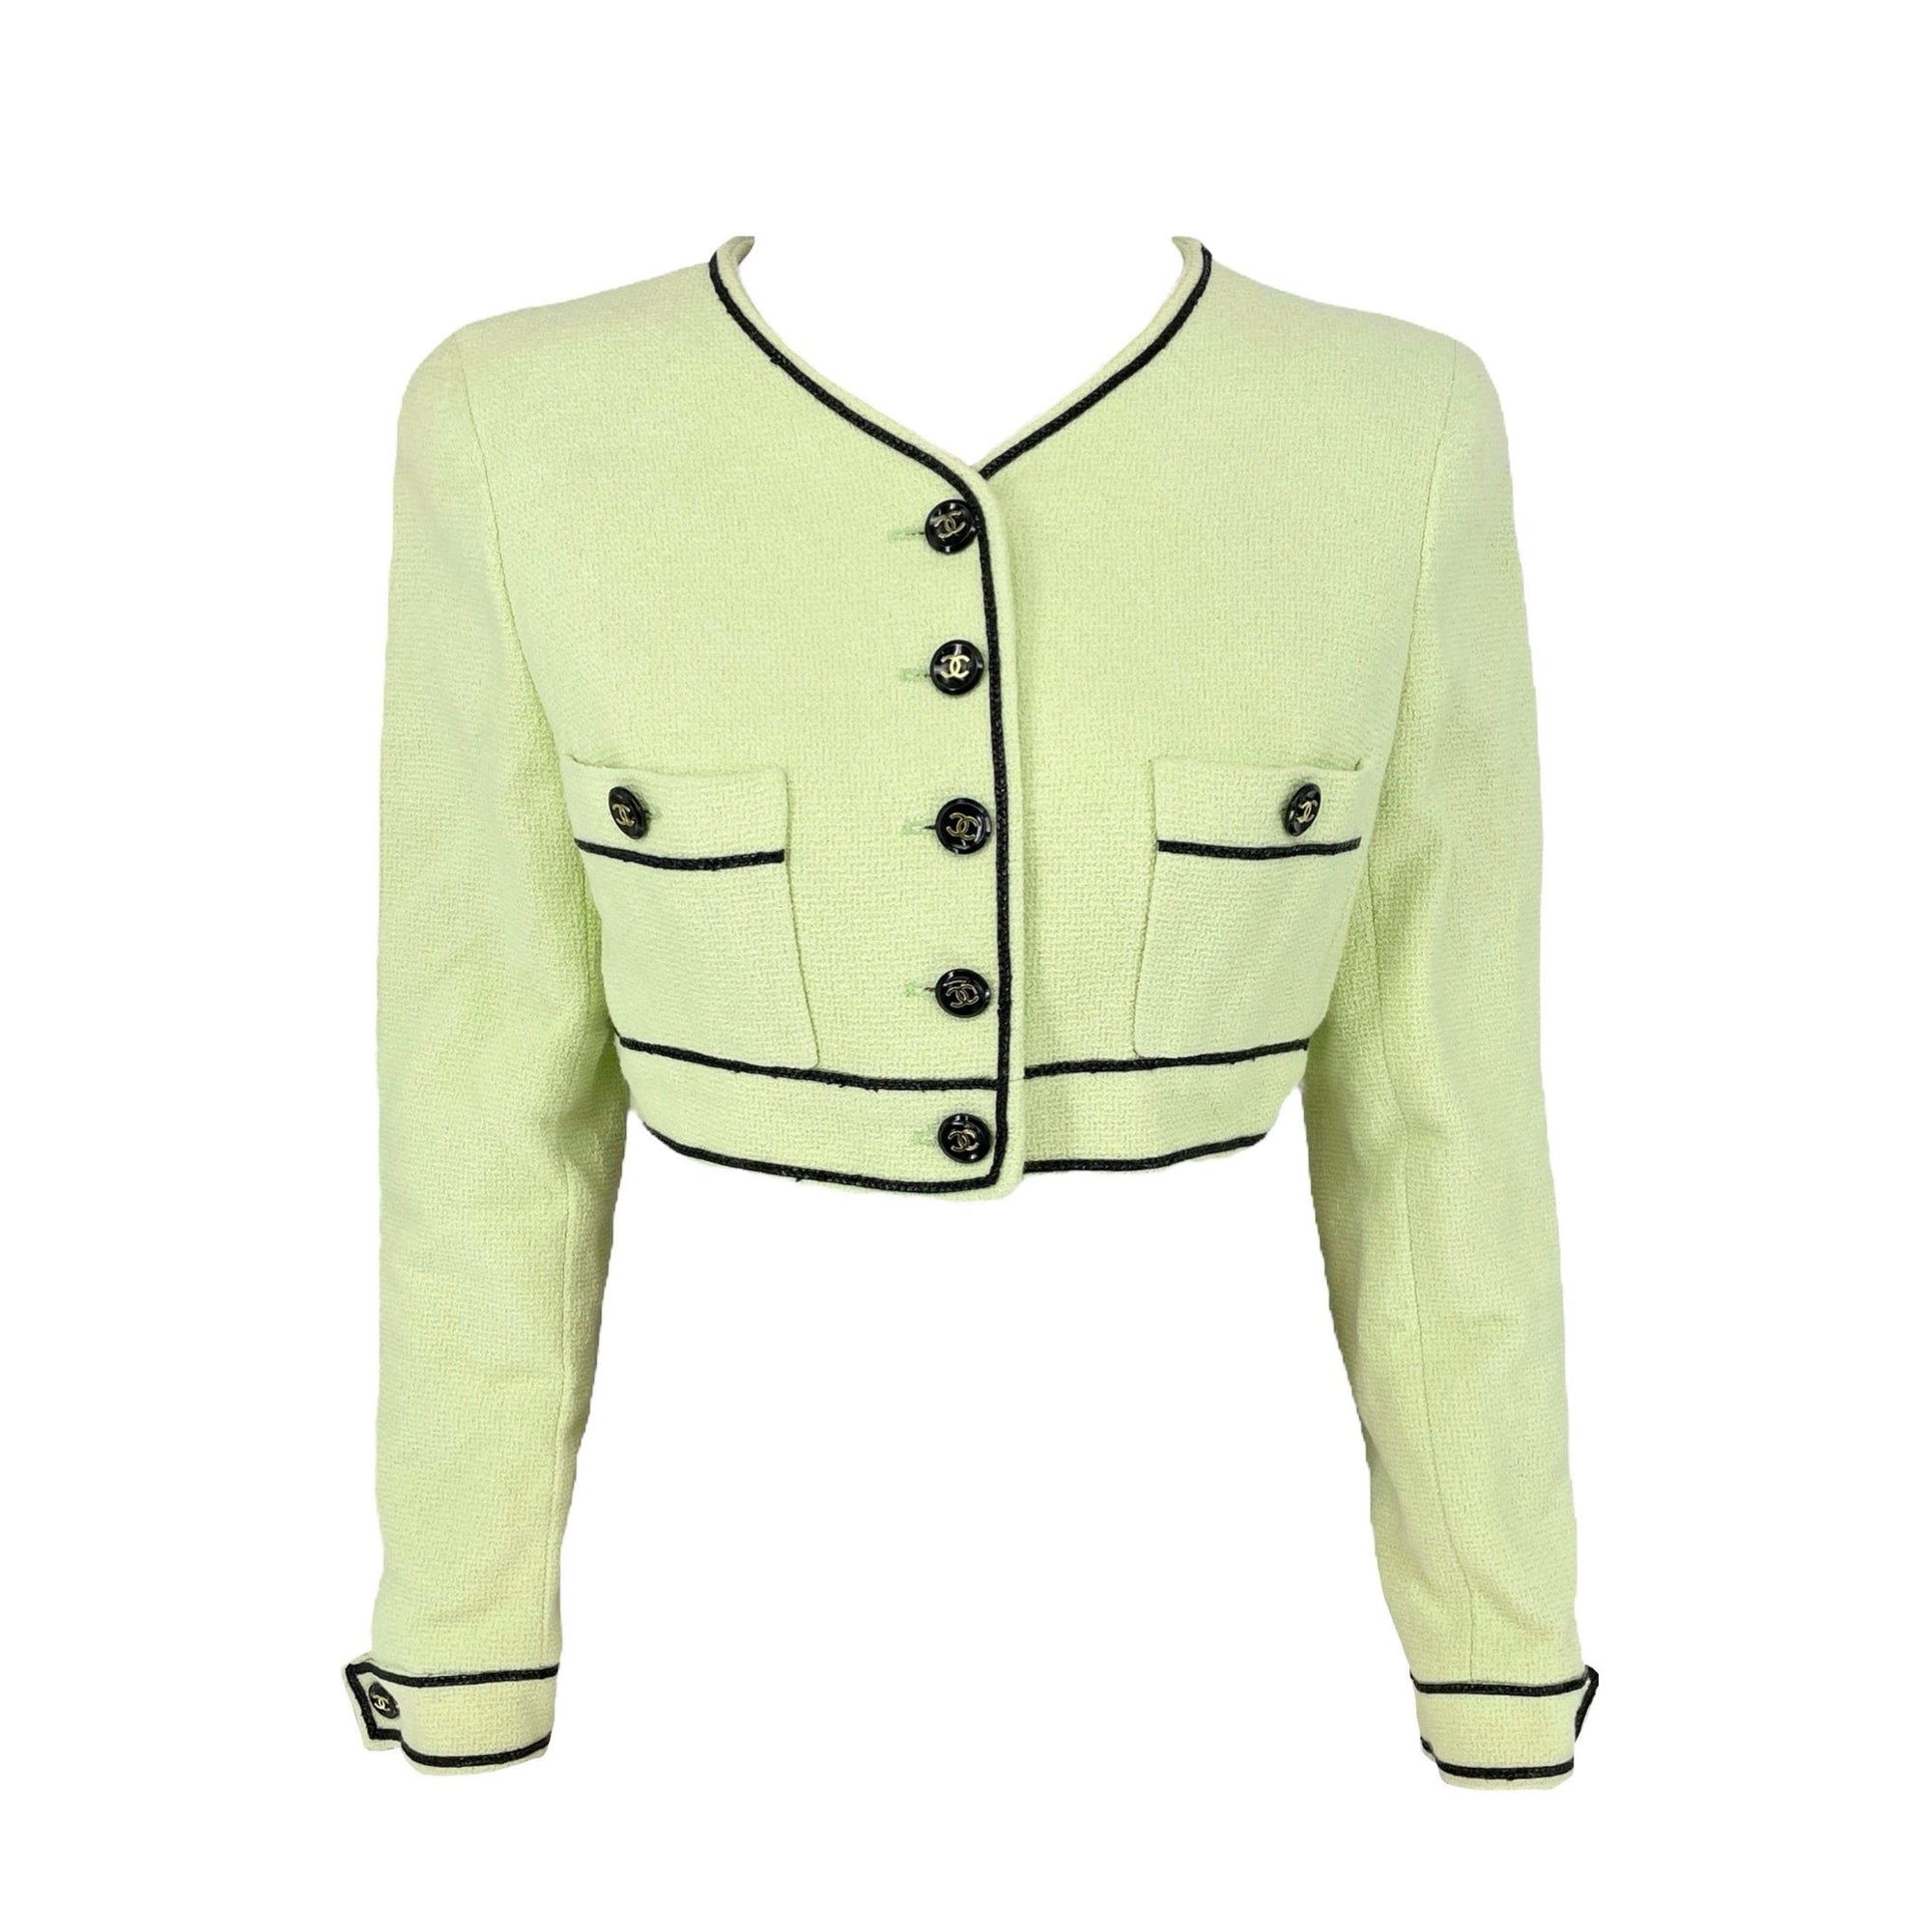 Treasures of NYC - Chanel Lime Green Cropped Jacket